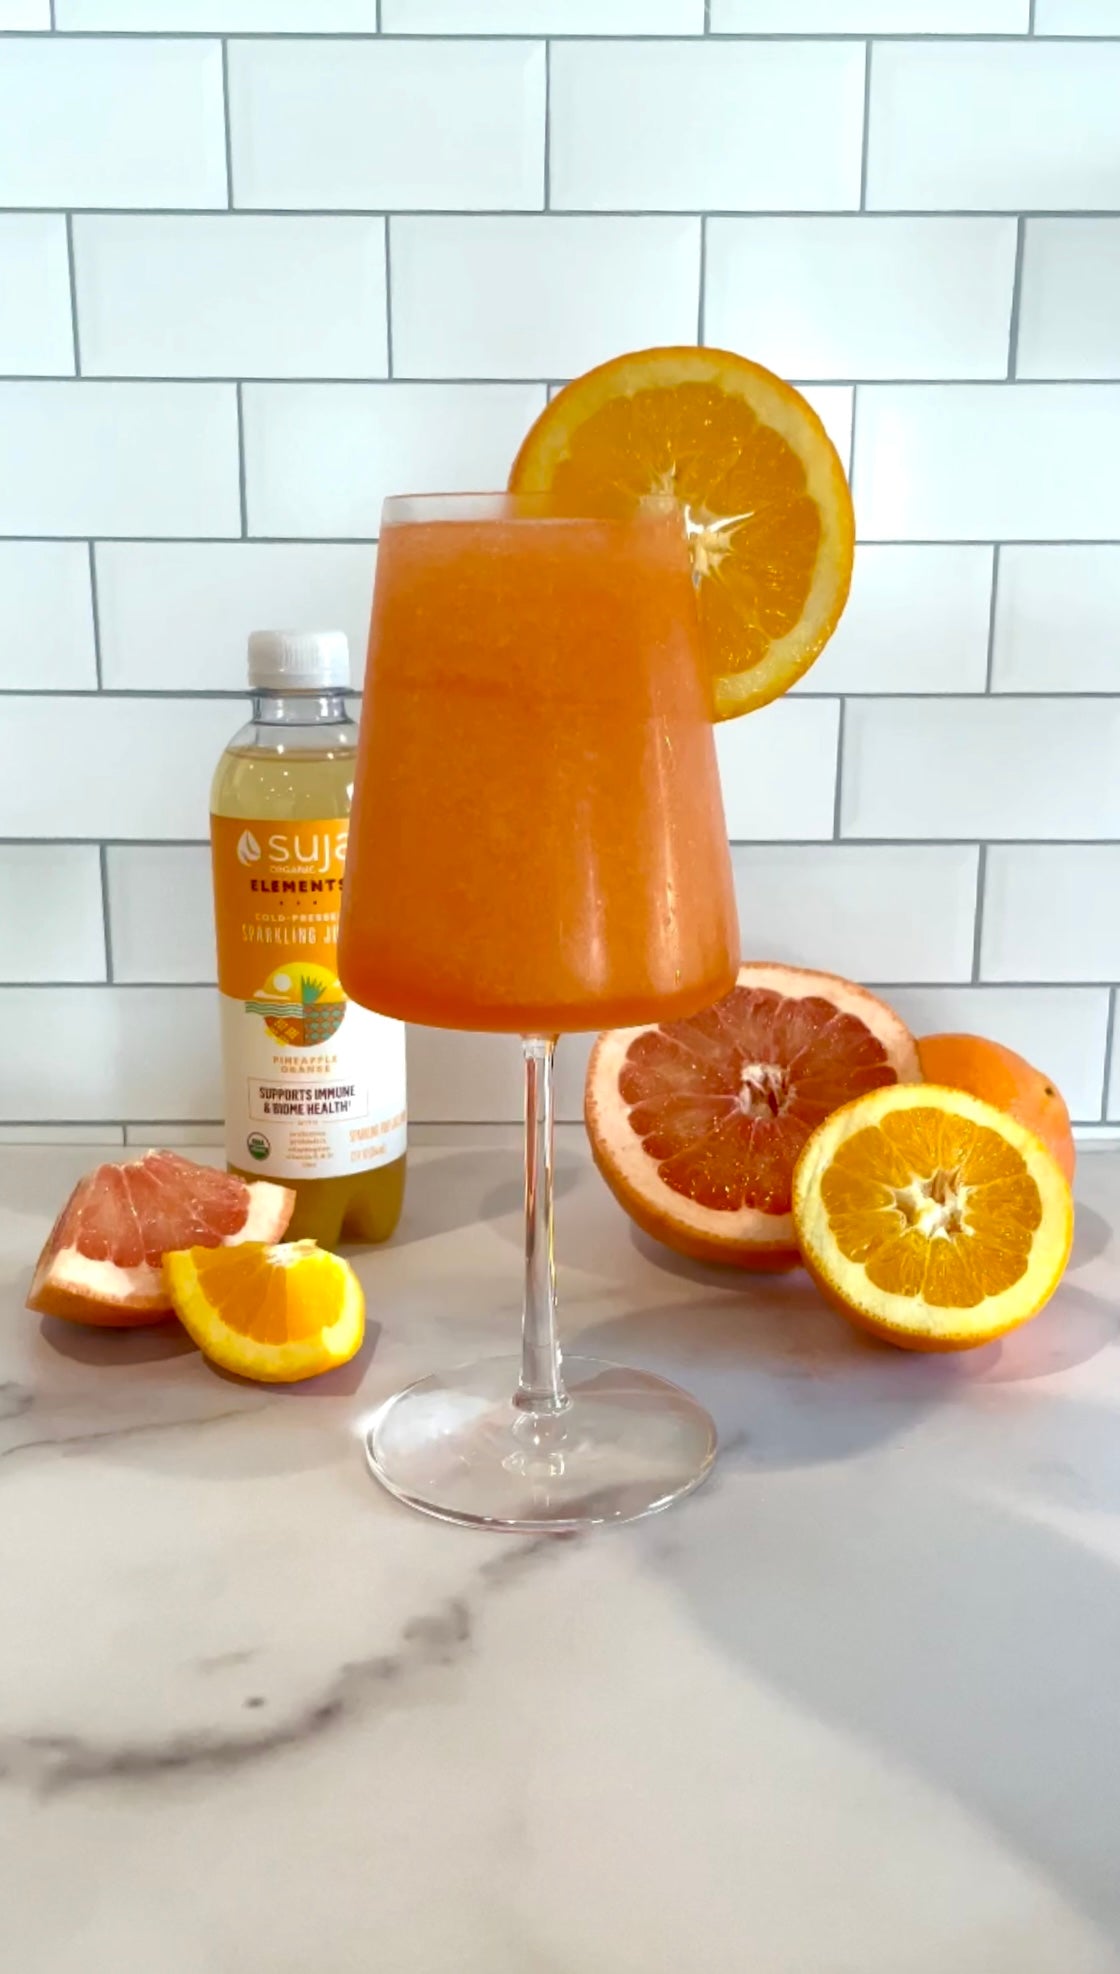 A Suja cocktail with Aperol spritz